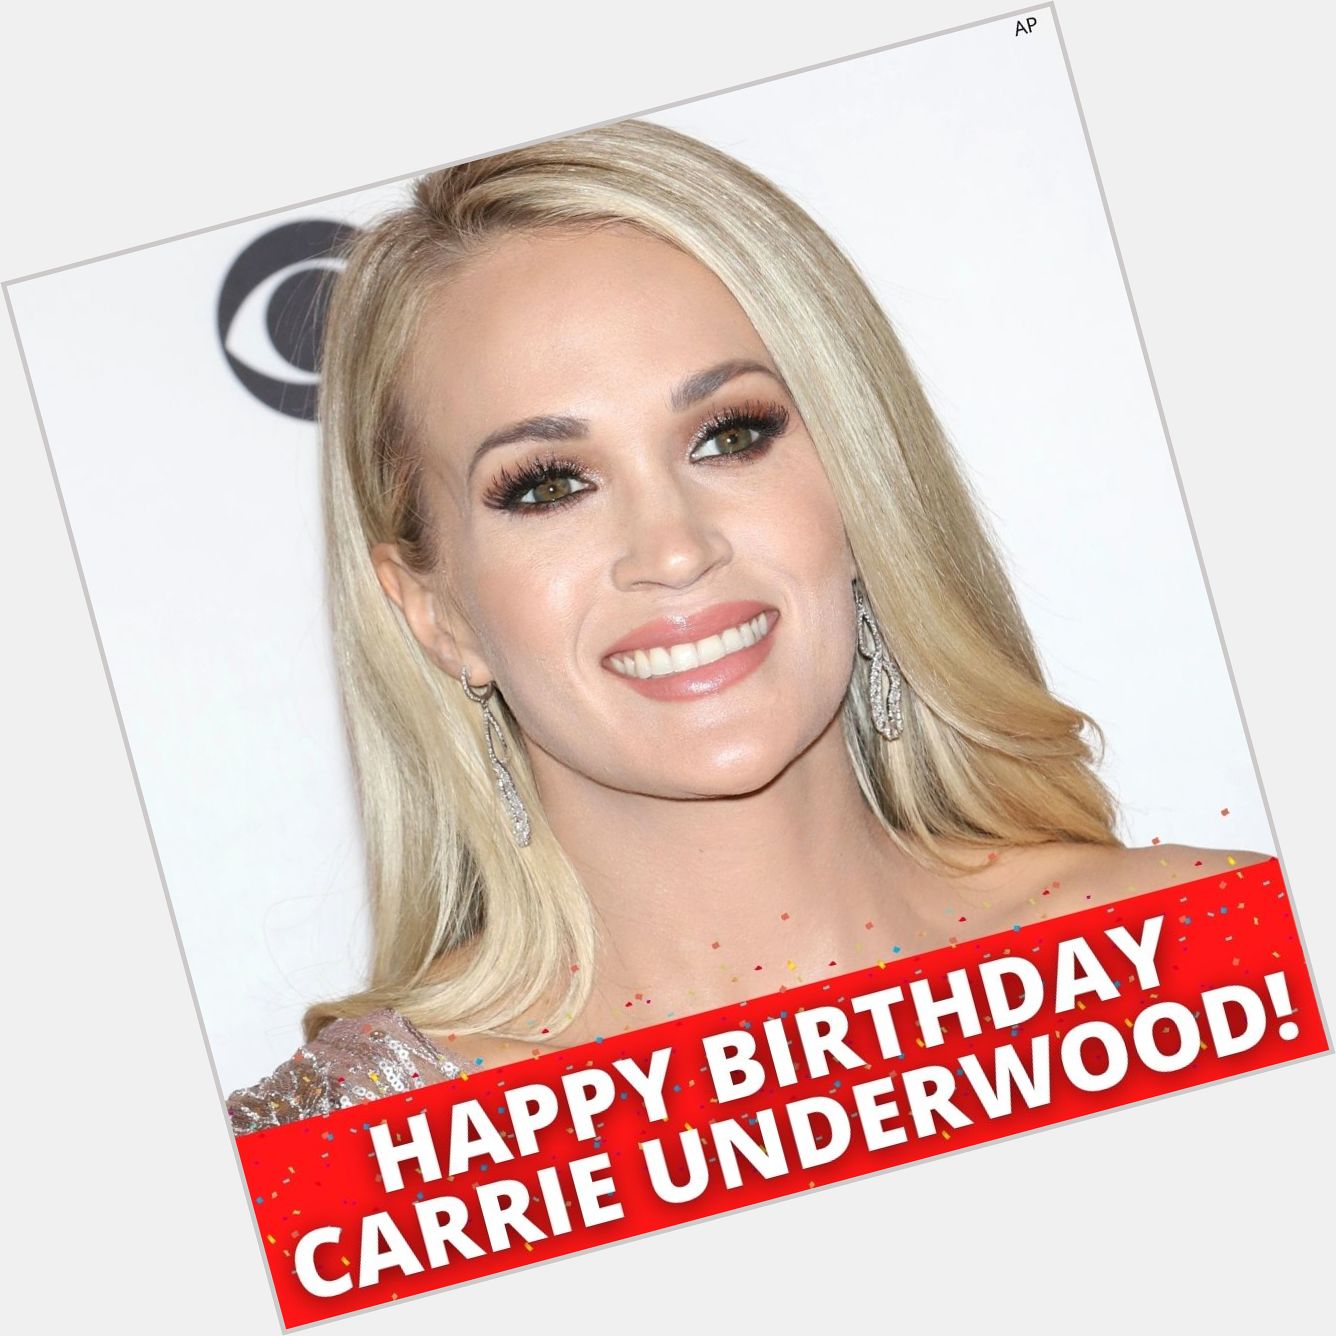 Happy birthday to Carrie Underwood! The country singer turns 38 today. What\s your favorite song of hers? 